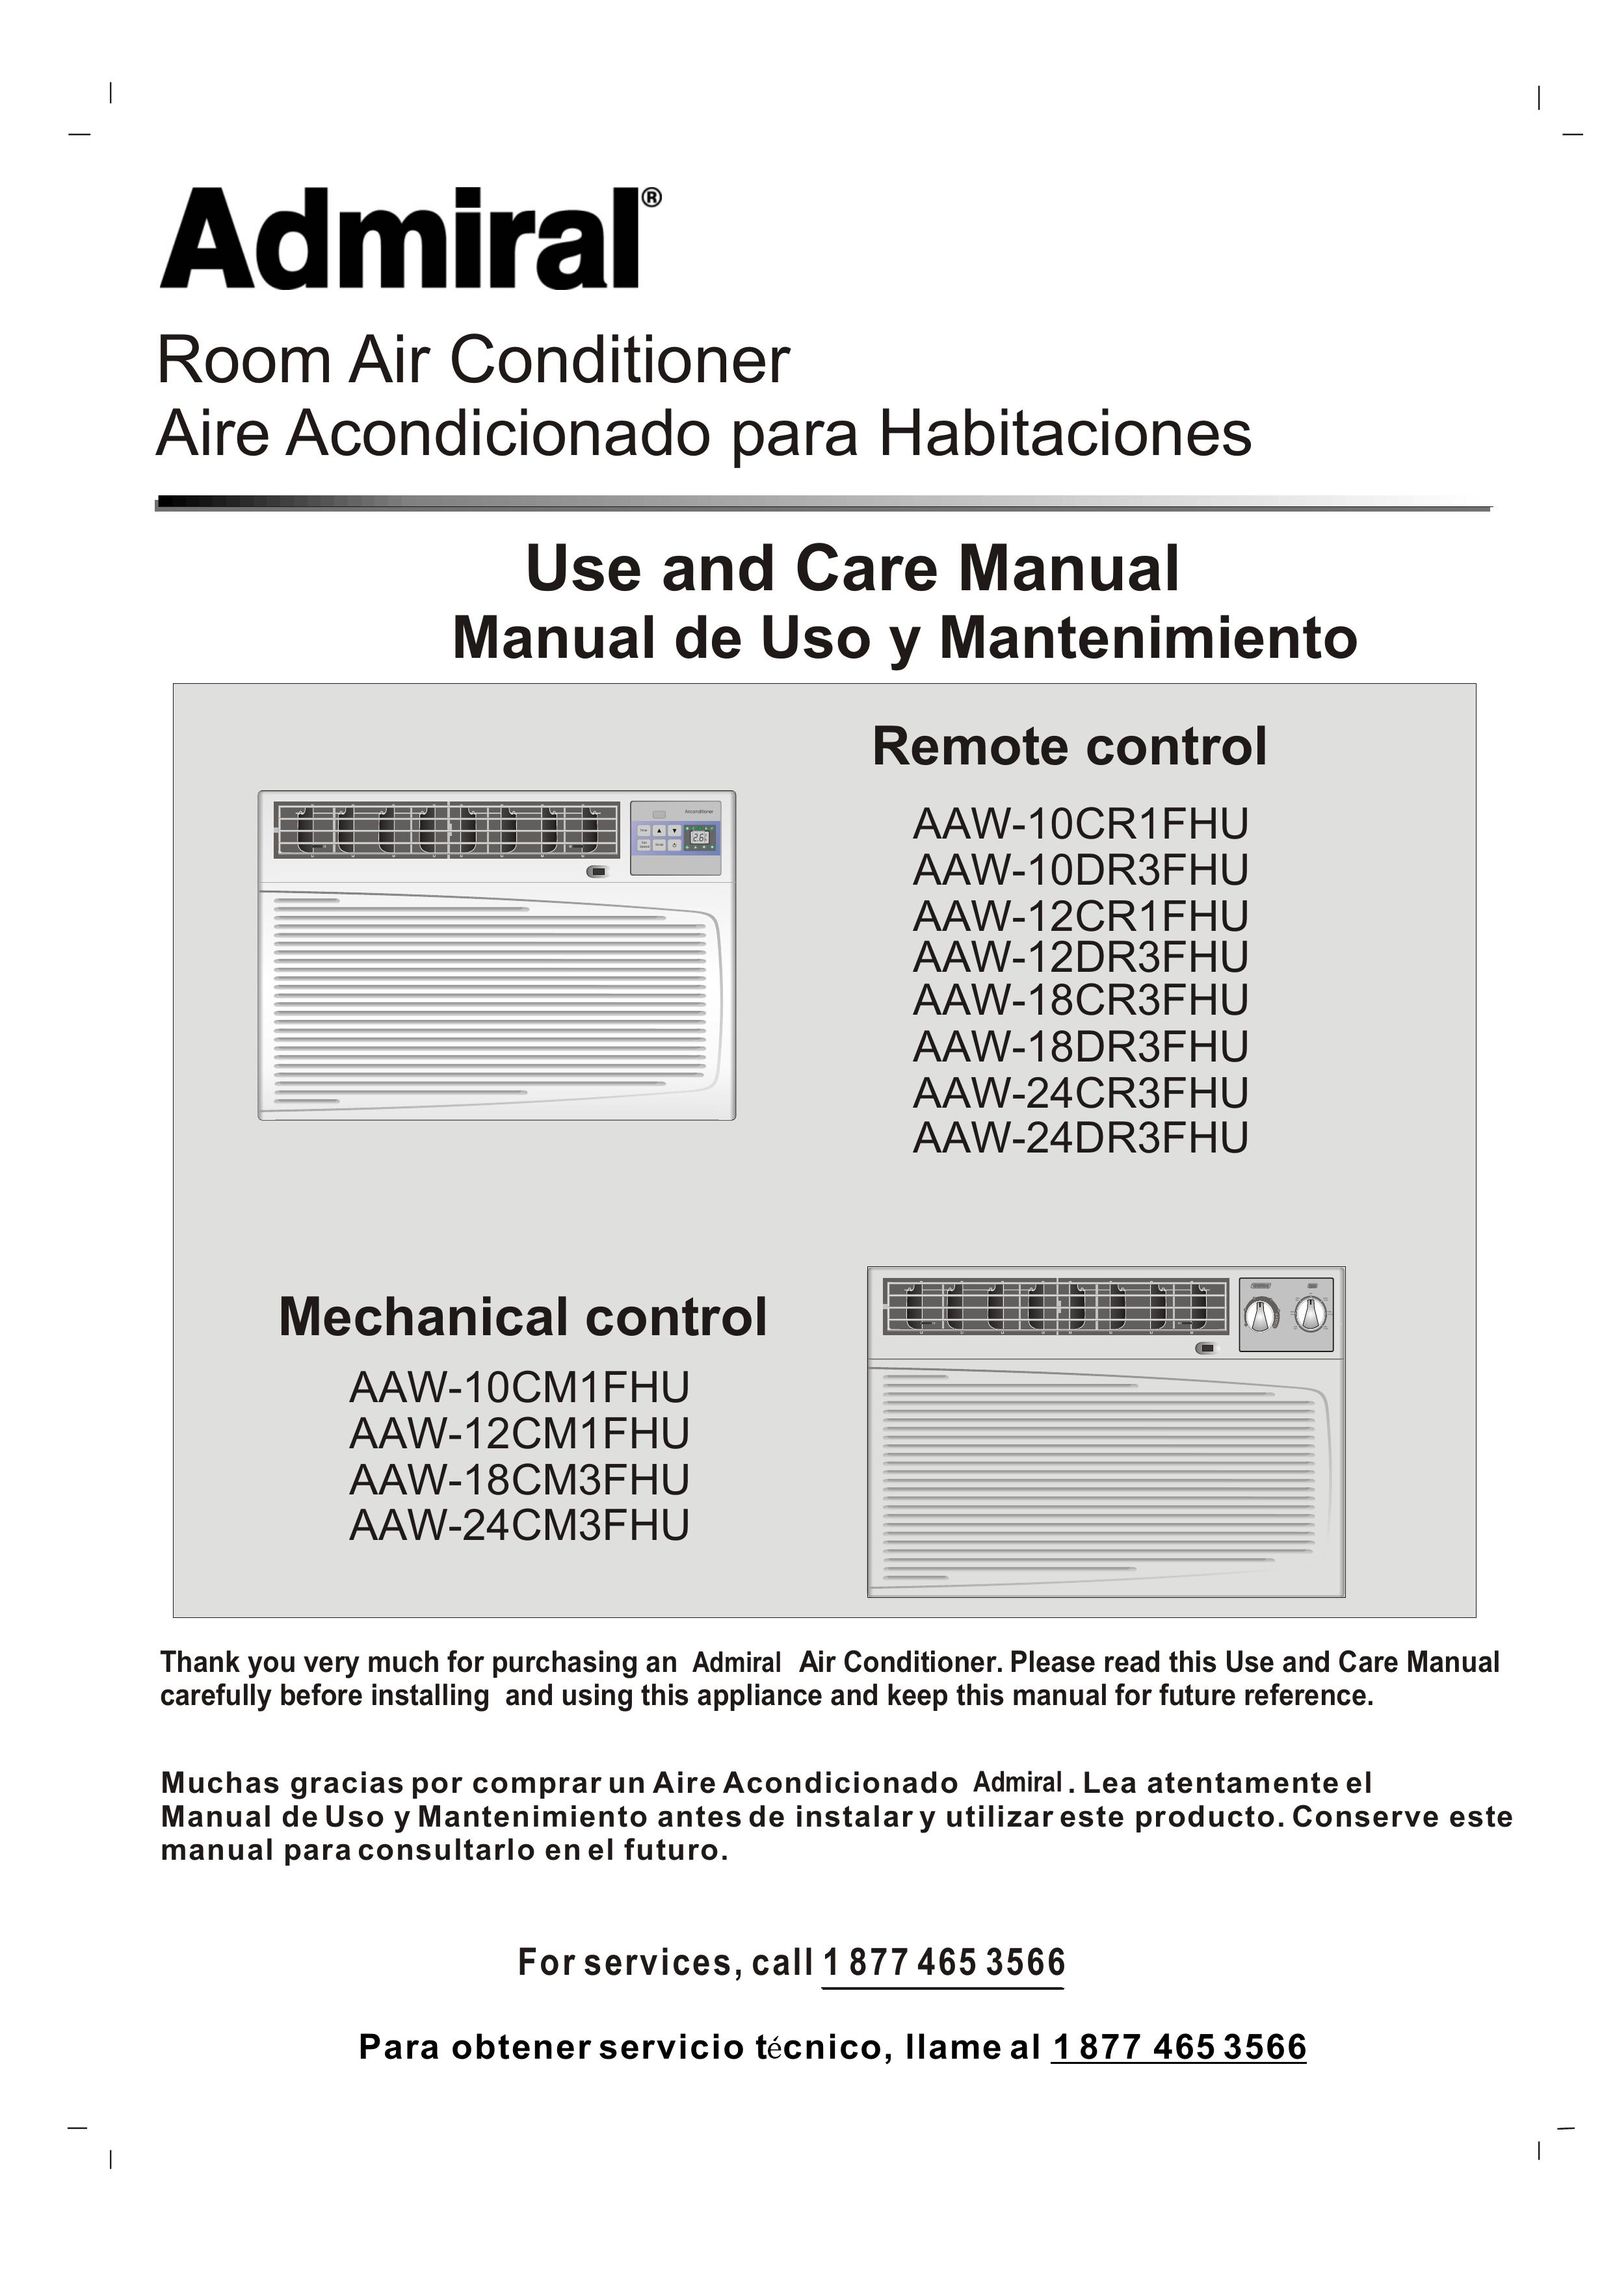 Admiral AAW-12DR3FHU Air Conditioner User Manual (Page 1)